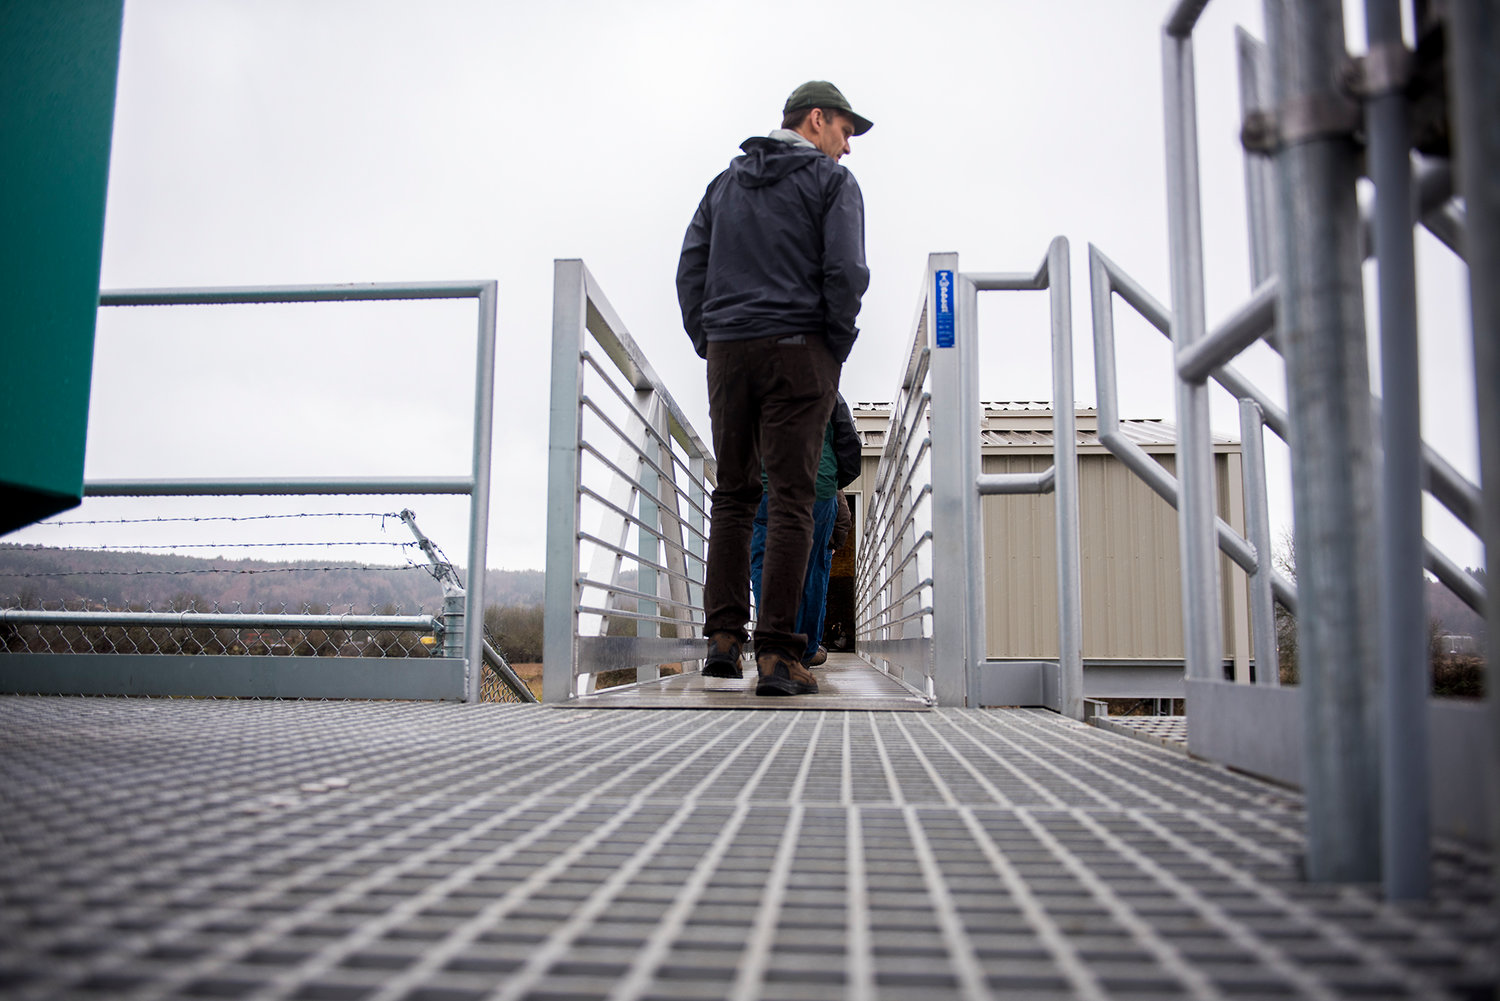 Scott Boettcher of the Chehalis Basin Flood Authority looks south from the catwalk leading to the elevated pump house at the Centralia/Chehalis Airport during a tour on Thursday afternoon.